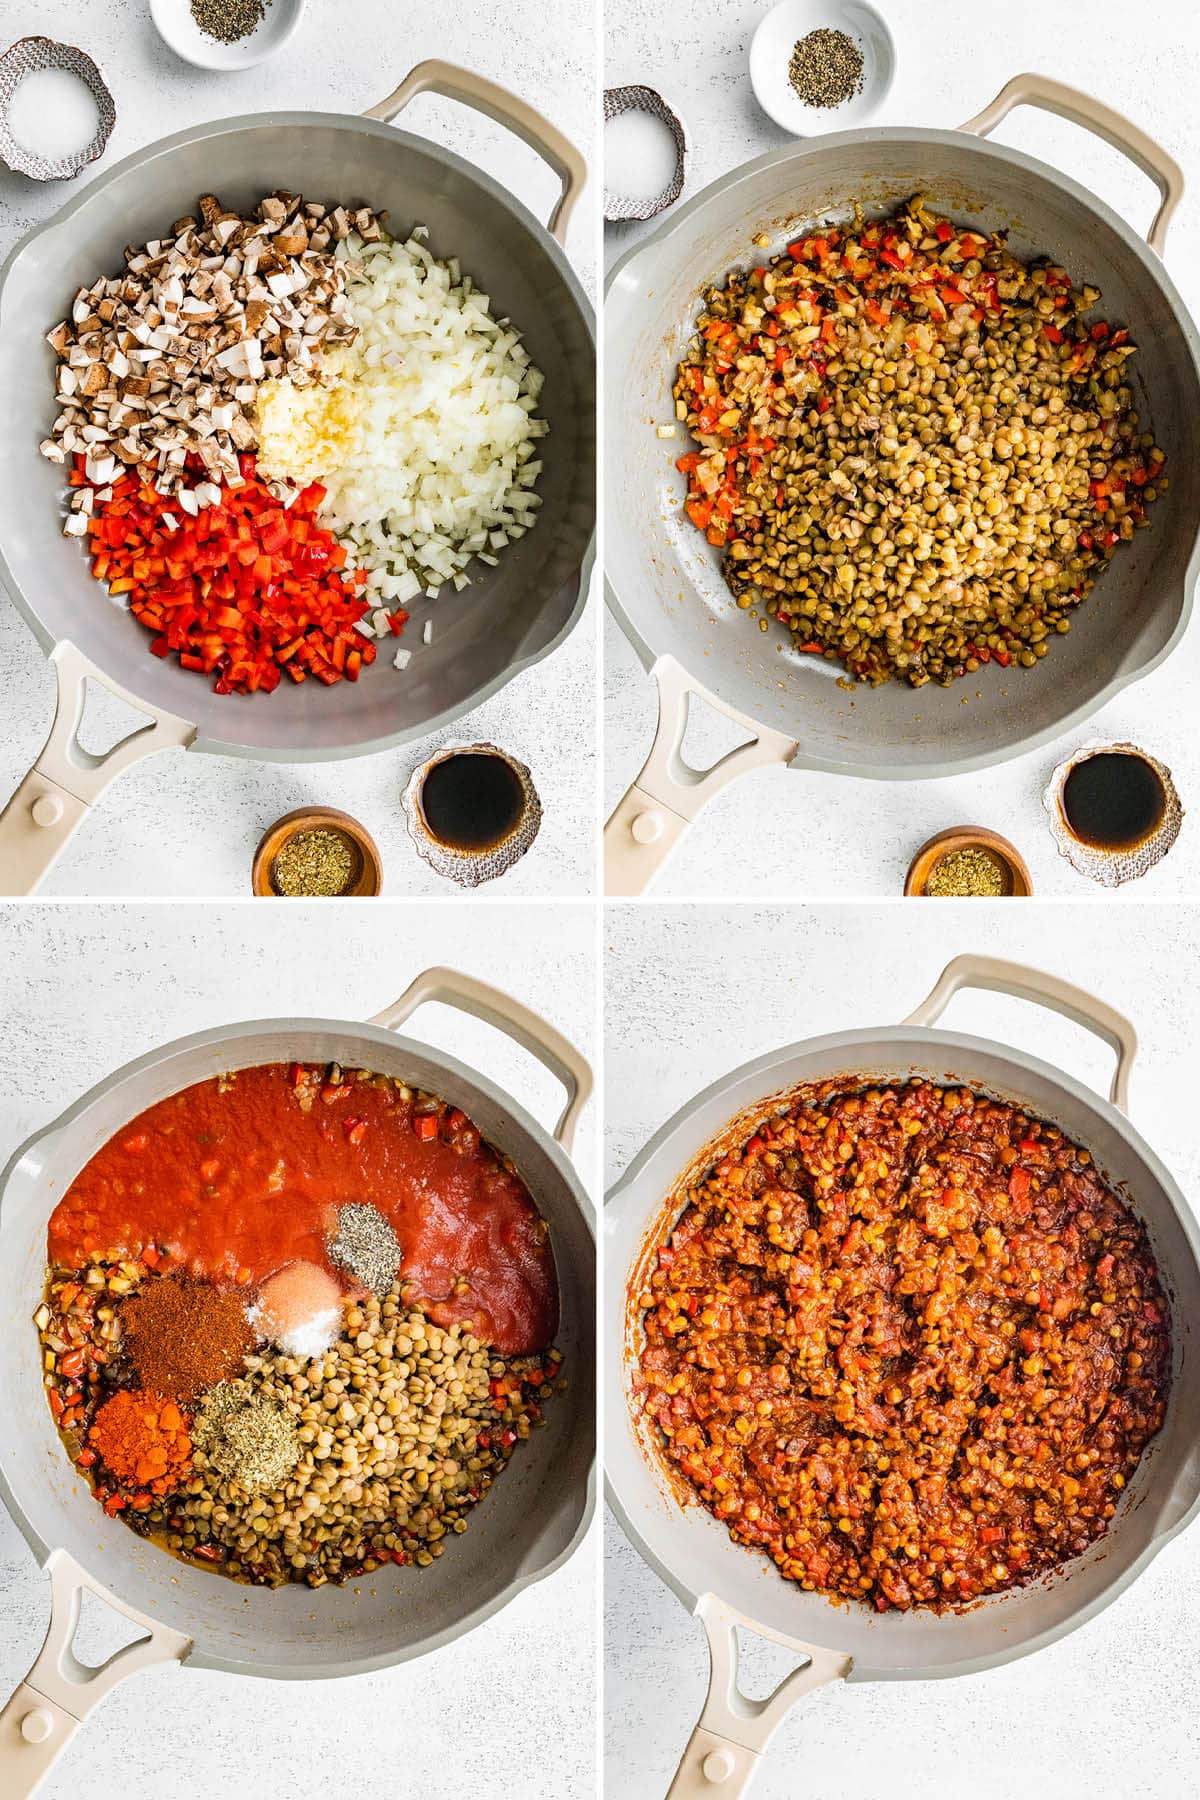 Collage of four photos showing how to make Vegan Sloppy Joes: cooking veggies in a pan, adding lentils, spices and sauce until cooked together.